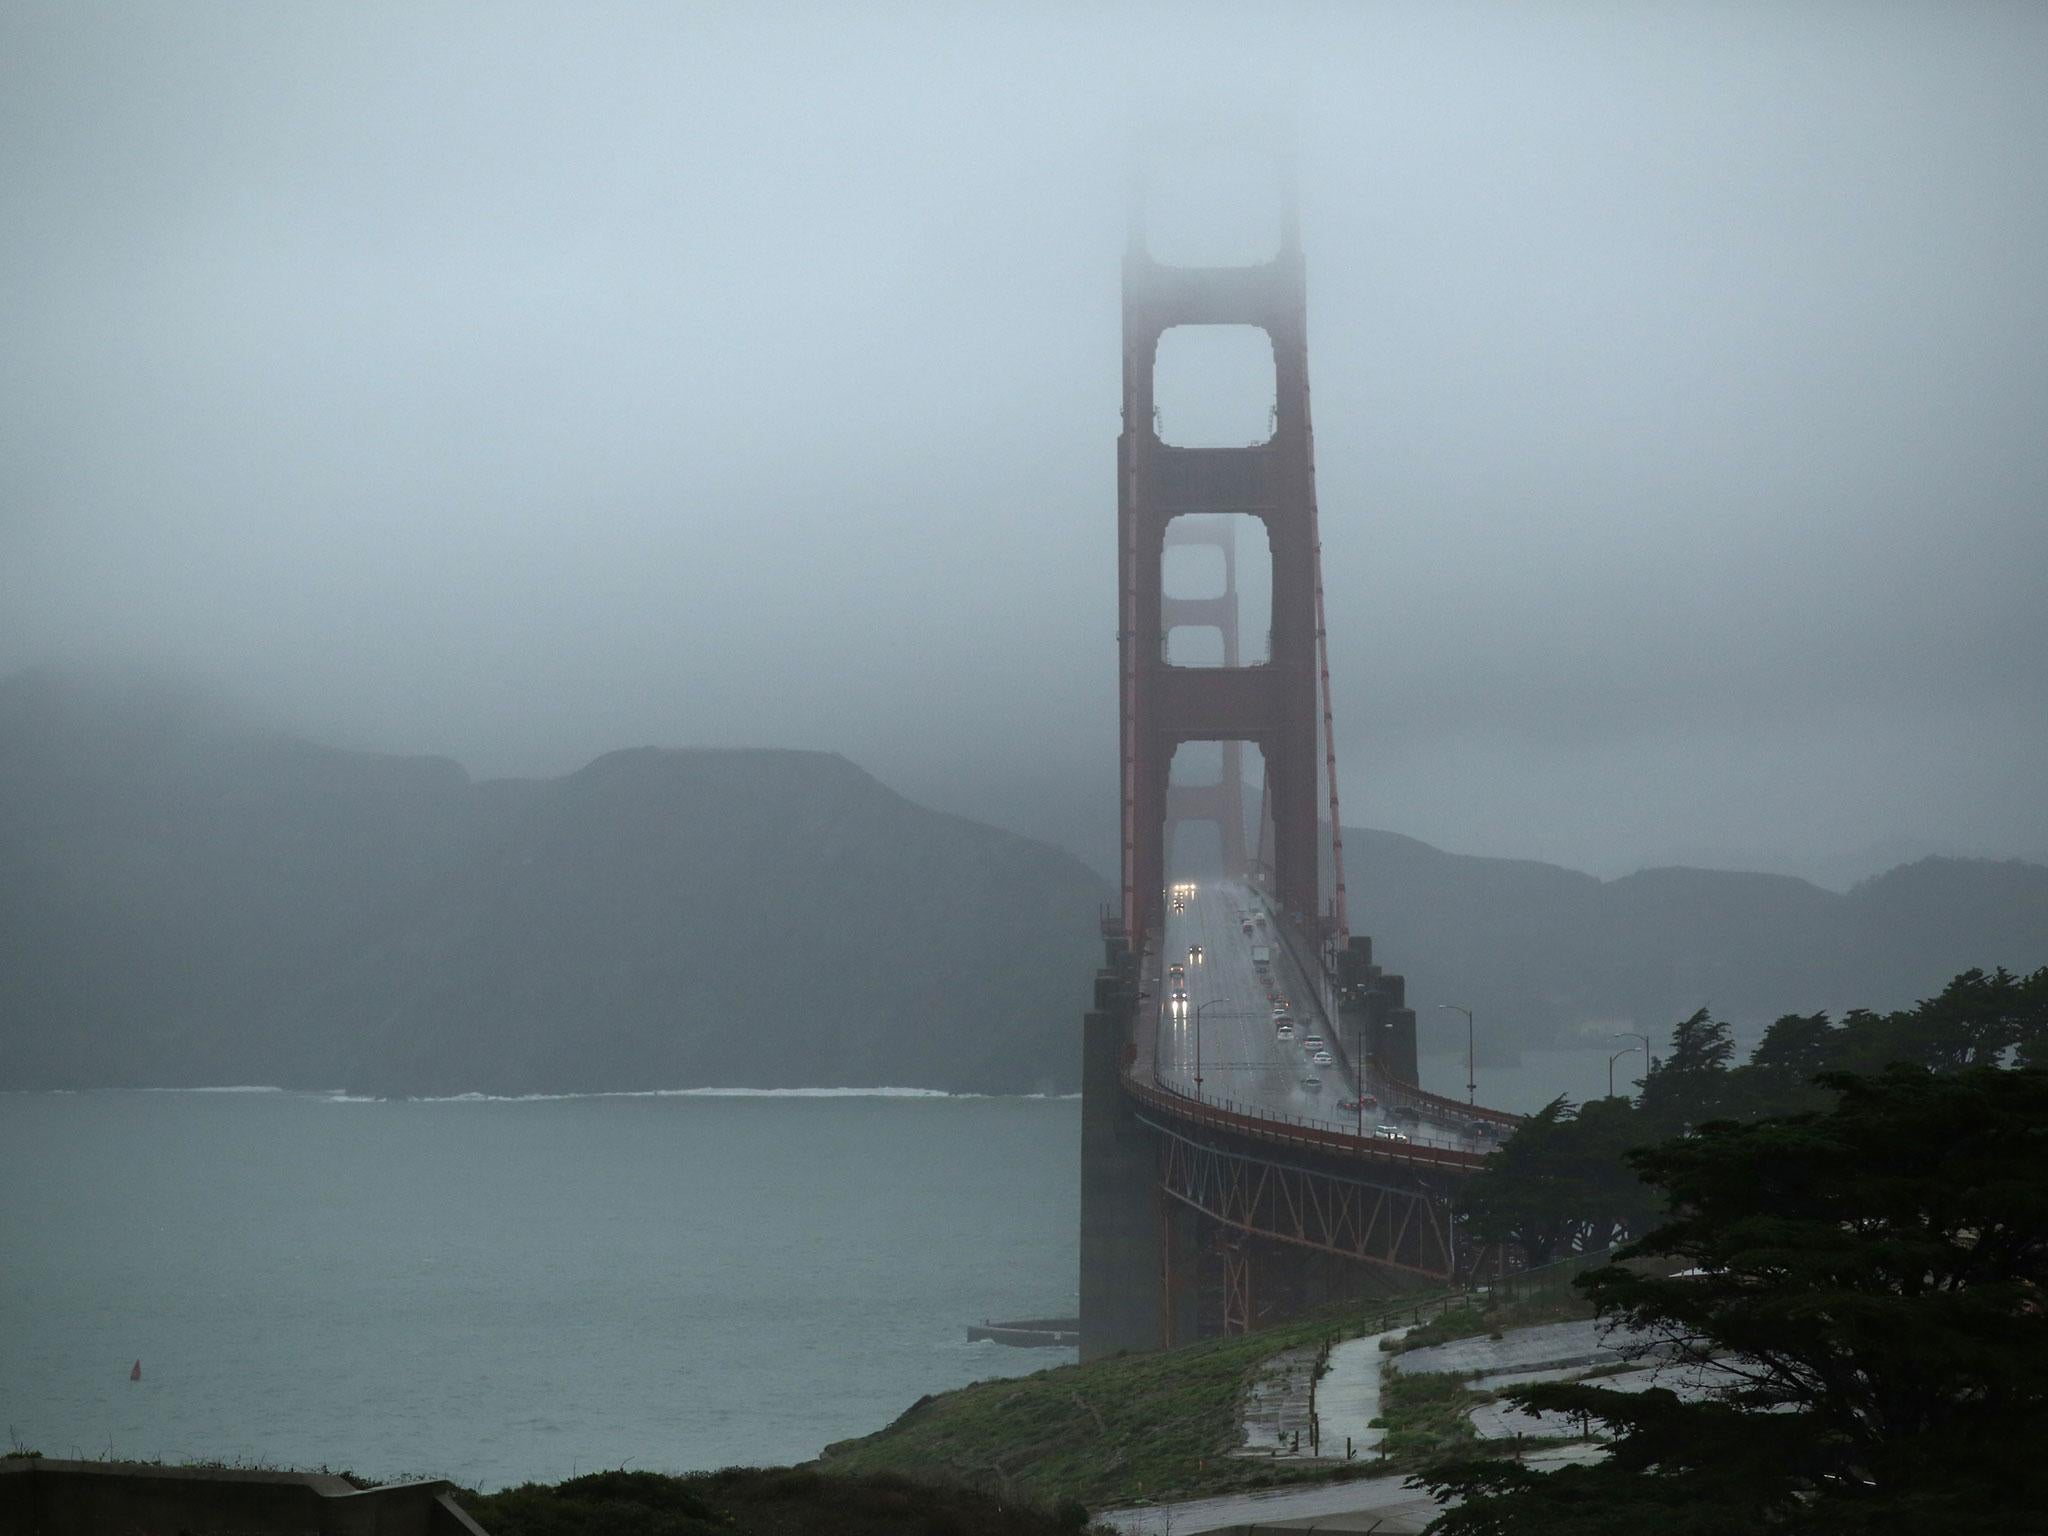 A rainy day at San Francisco Bay where atmospheric rivers dumped so much water it kill off thousands of oysters